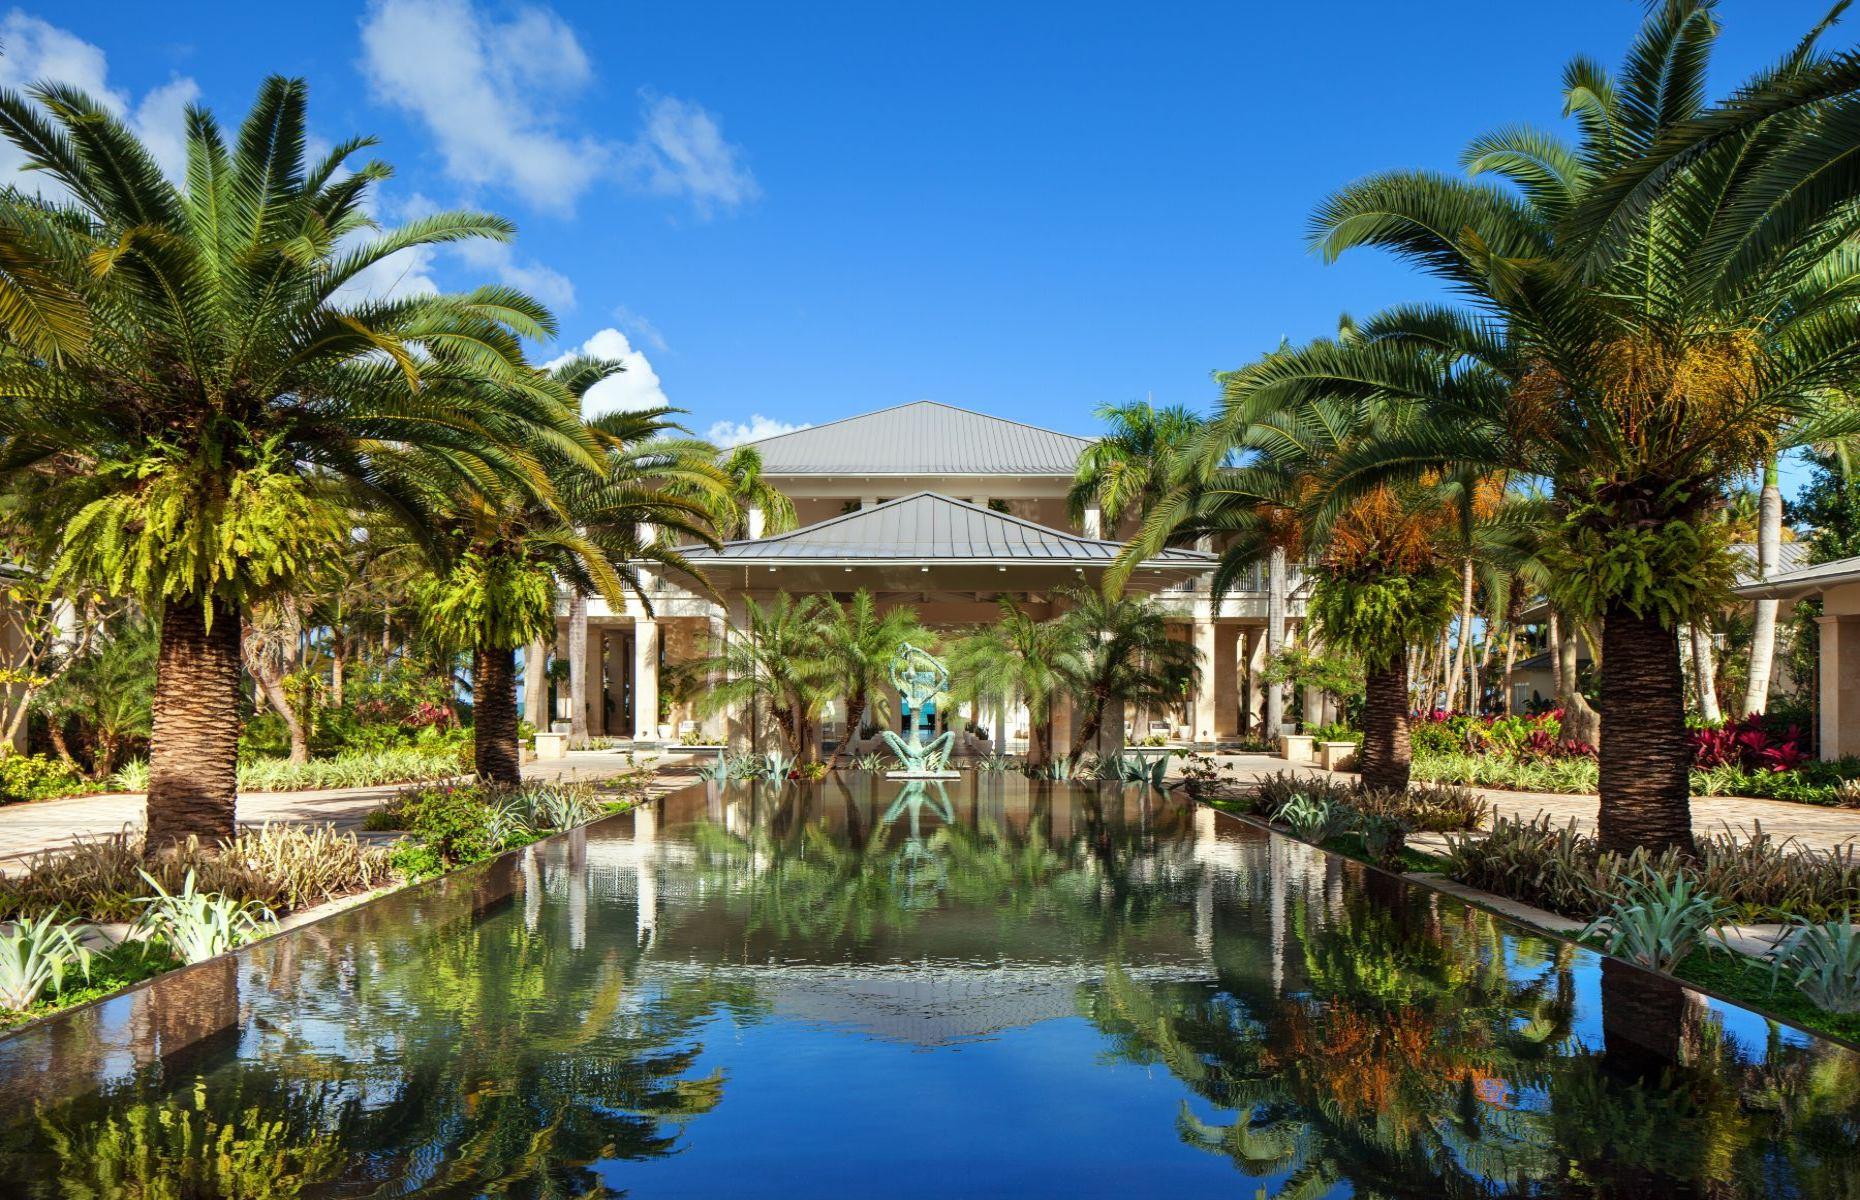 <p>Set on a coconut plantation between two of Puerto Rico’s stunning natural attractions, El Yunque National Forest and Espíritu Santo River State Preserve, the <a href="https://www.marriott.com/en-us/hotels/sjuxr-the-st-regis-bahia-beach-resort-puerto-rico/overview/?scid=f2ae0541-1279-4f24-b197-a979c79310b0">St. Regis Bahia Beach Resort</a> is the perfect base for some hiking adventures, but equally as inviting if you’re here to relax and recharge. With two miles of sandy beach overlooking the Atlantic, guests can enjoy water sports, a round of golf on the 18-hole course, and pampering in the sanctuary of the Iridium Spa.</p>